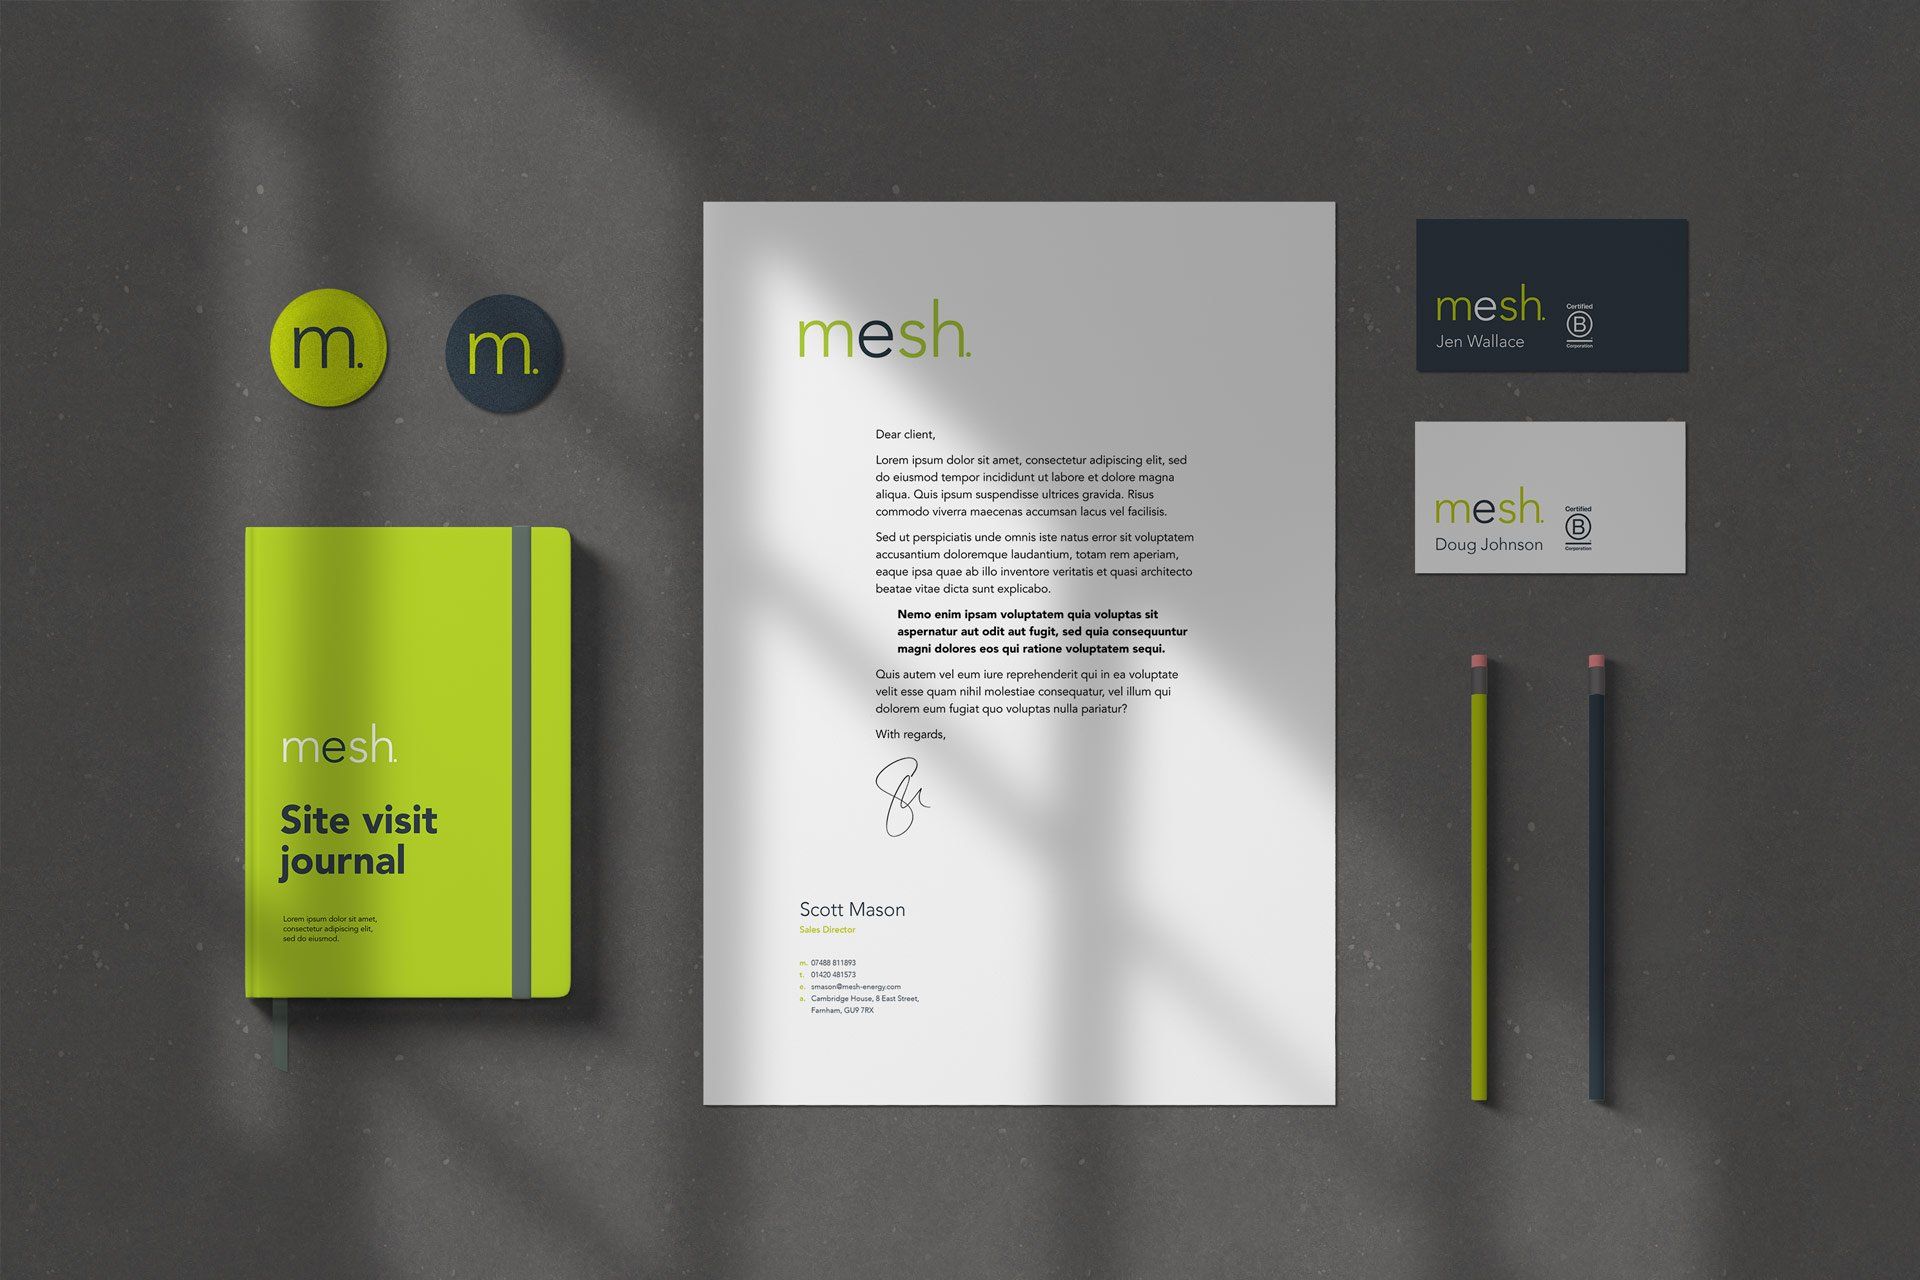 Stationary branded with the mesh logo and company colours (white, navy blue, and lime green) is laid out, evenly spaced, and a grey table.